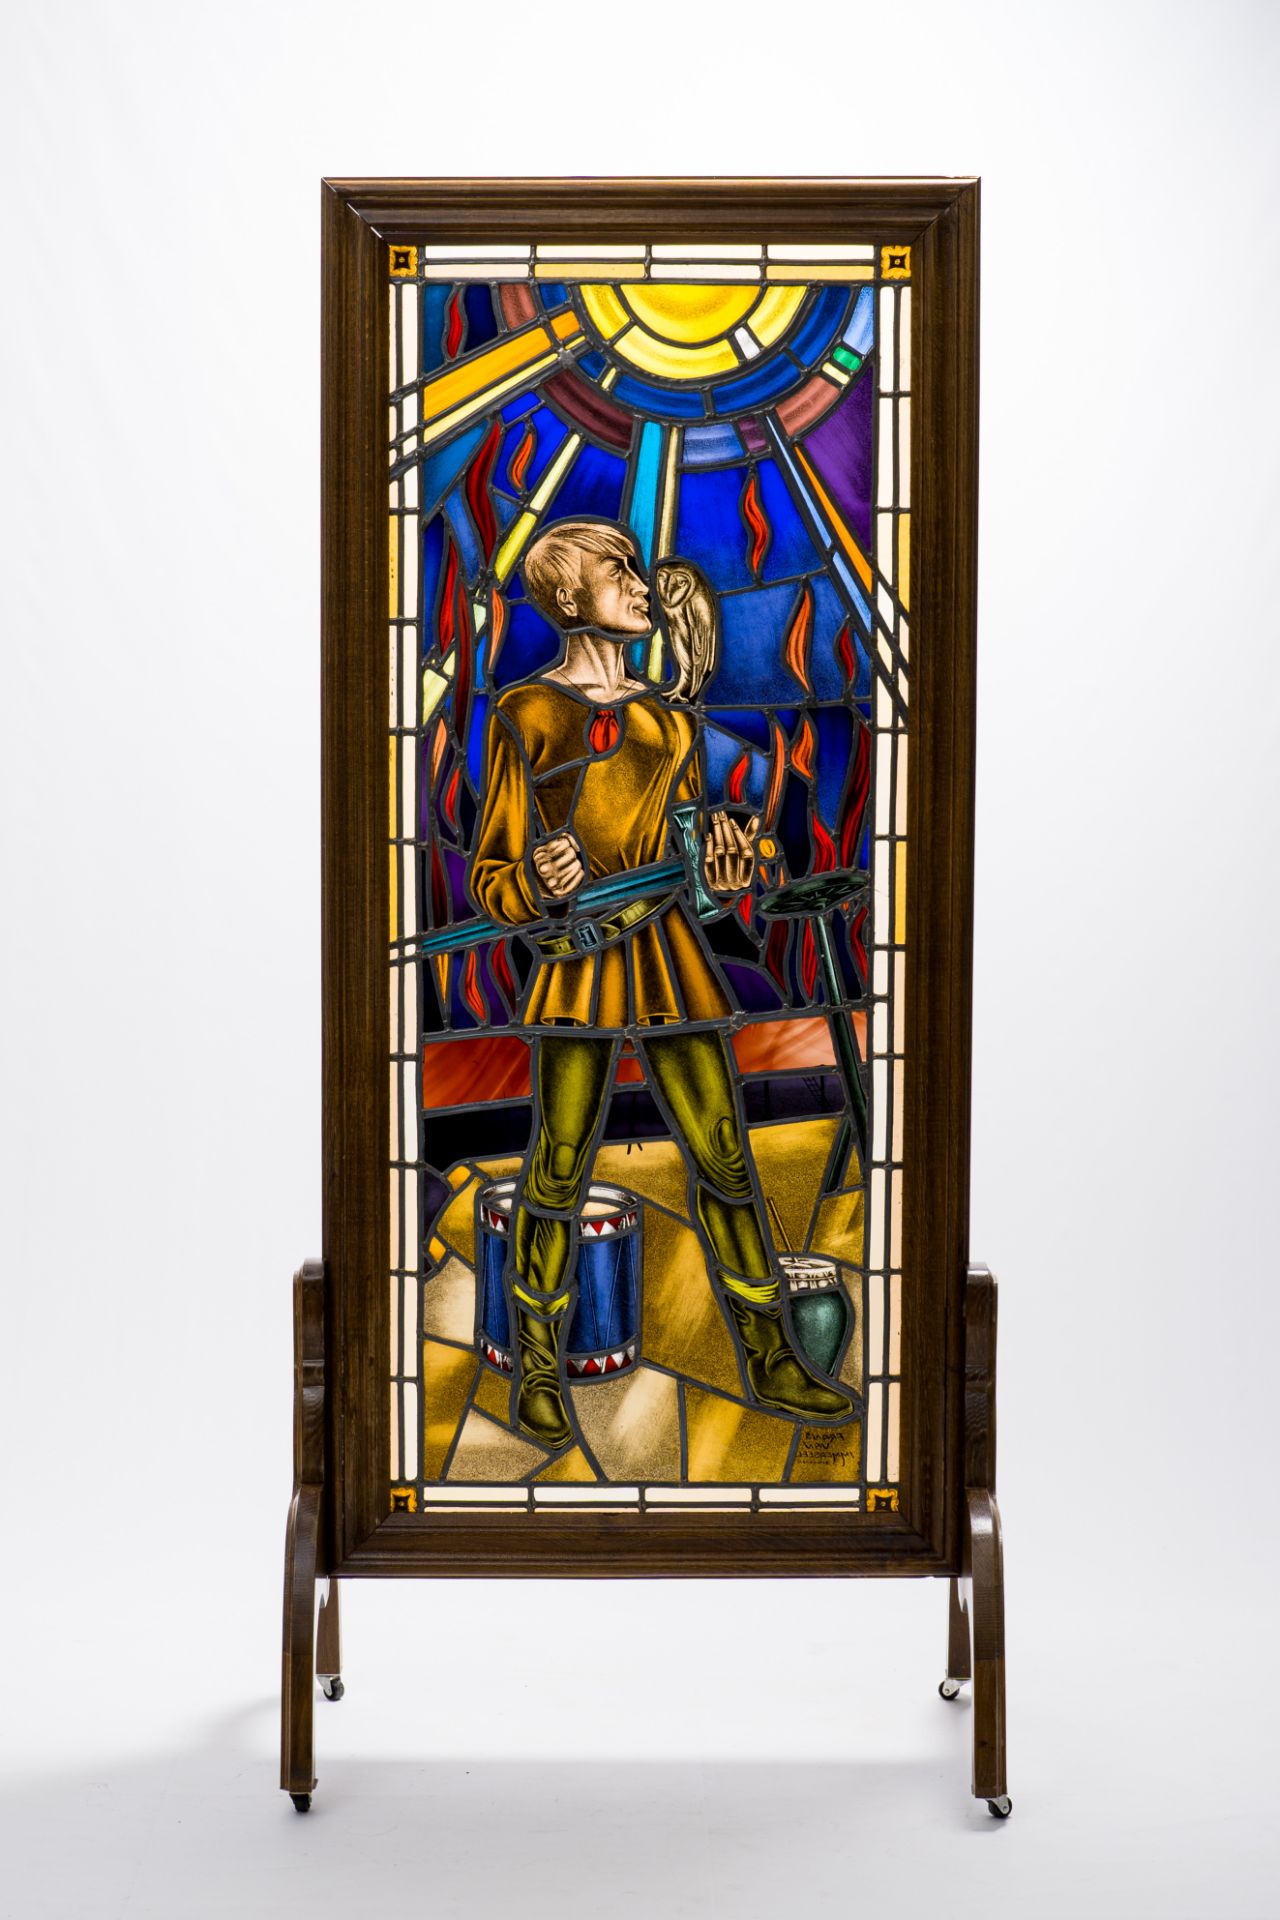 Frans Van Immerseel (1909-1978): A painted and stained glass 'Till Eulenspiegel' window in a wood fr - Image 8 of 8